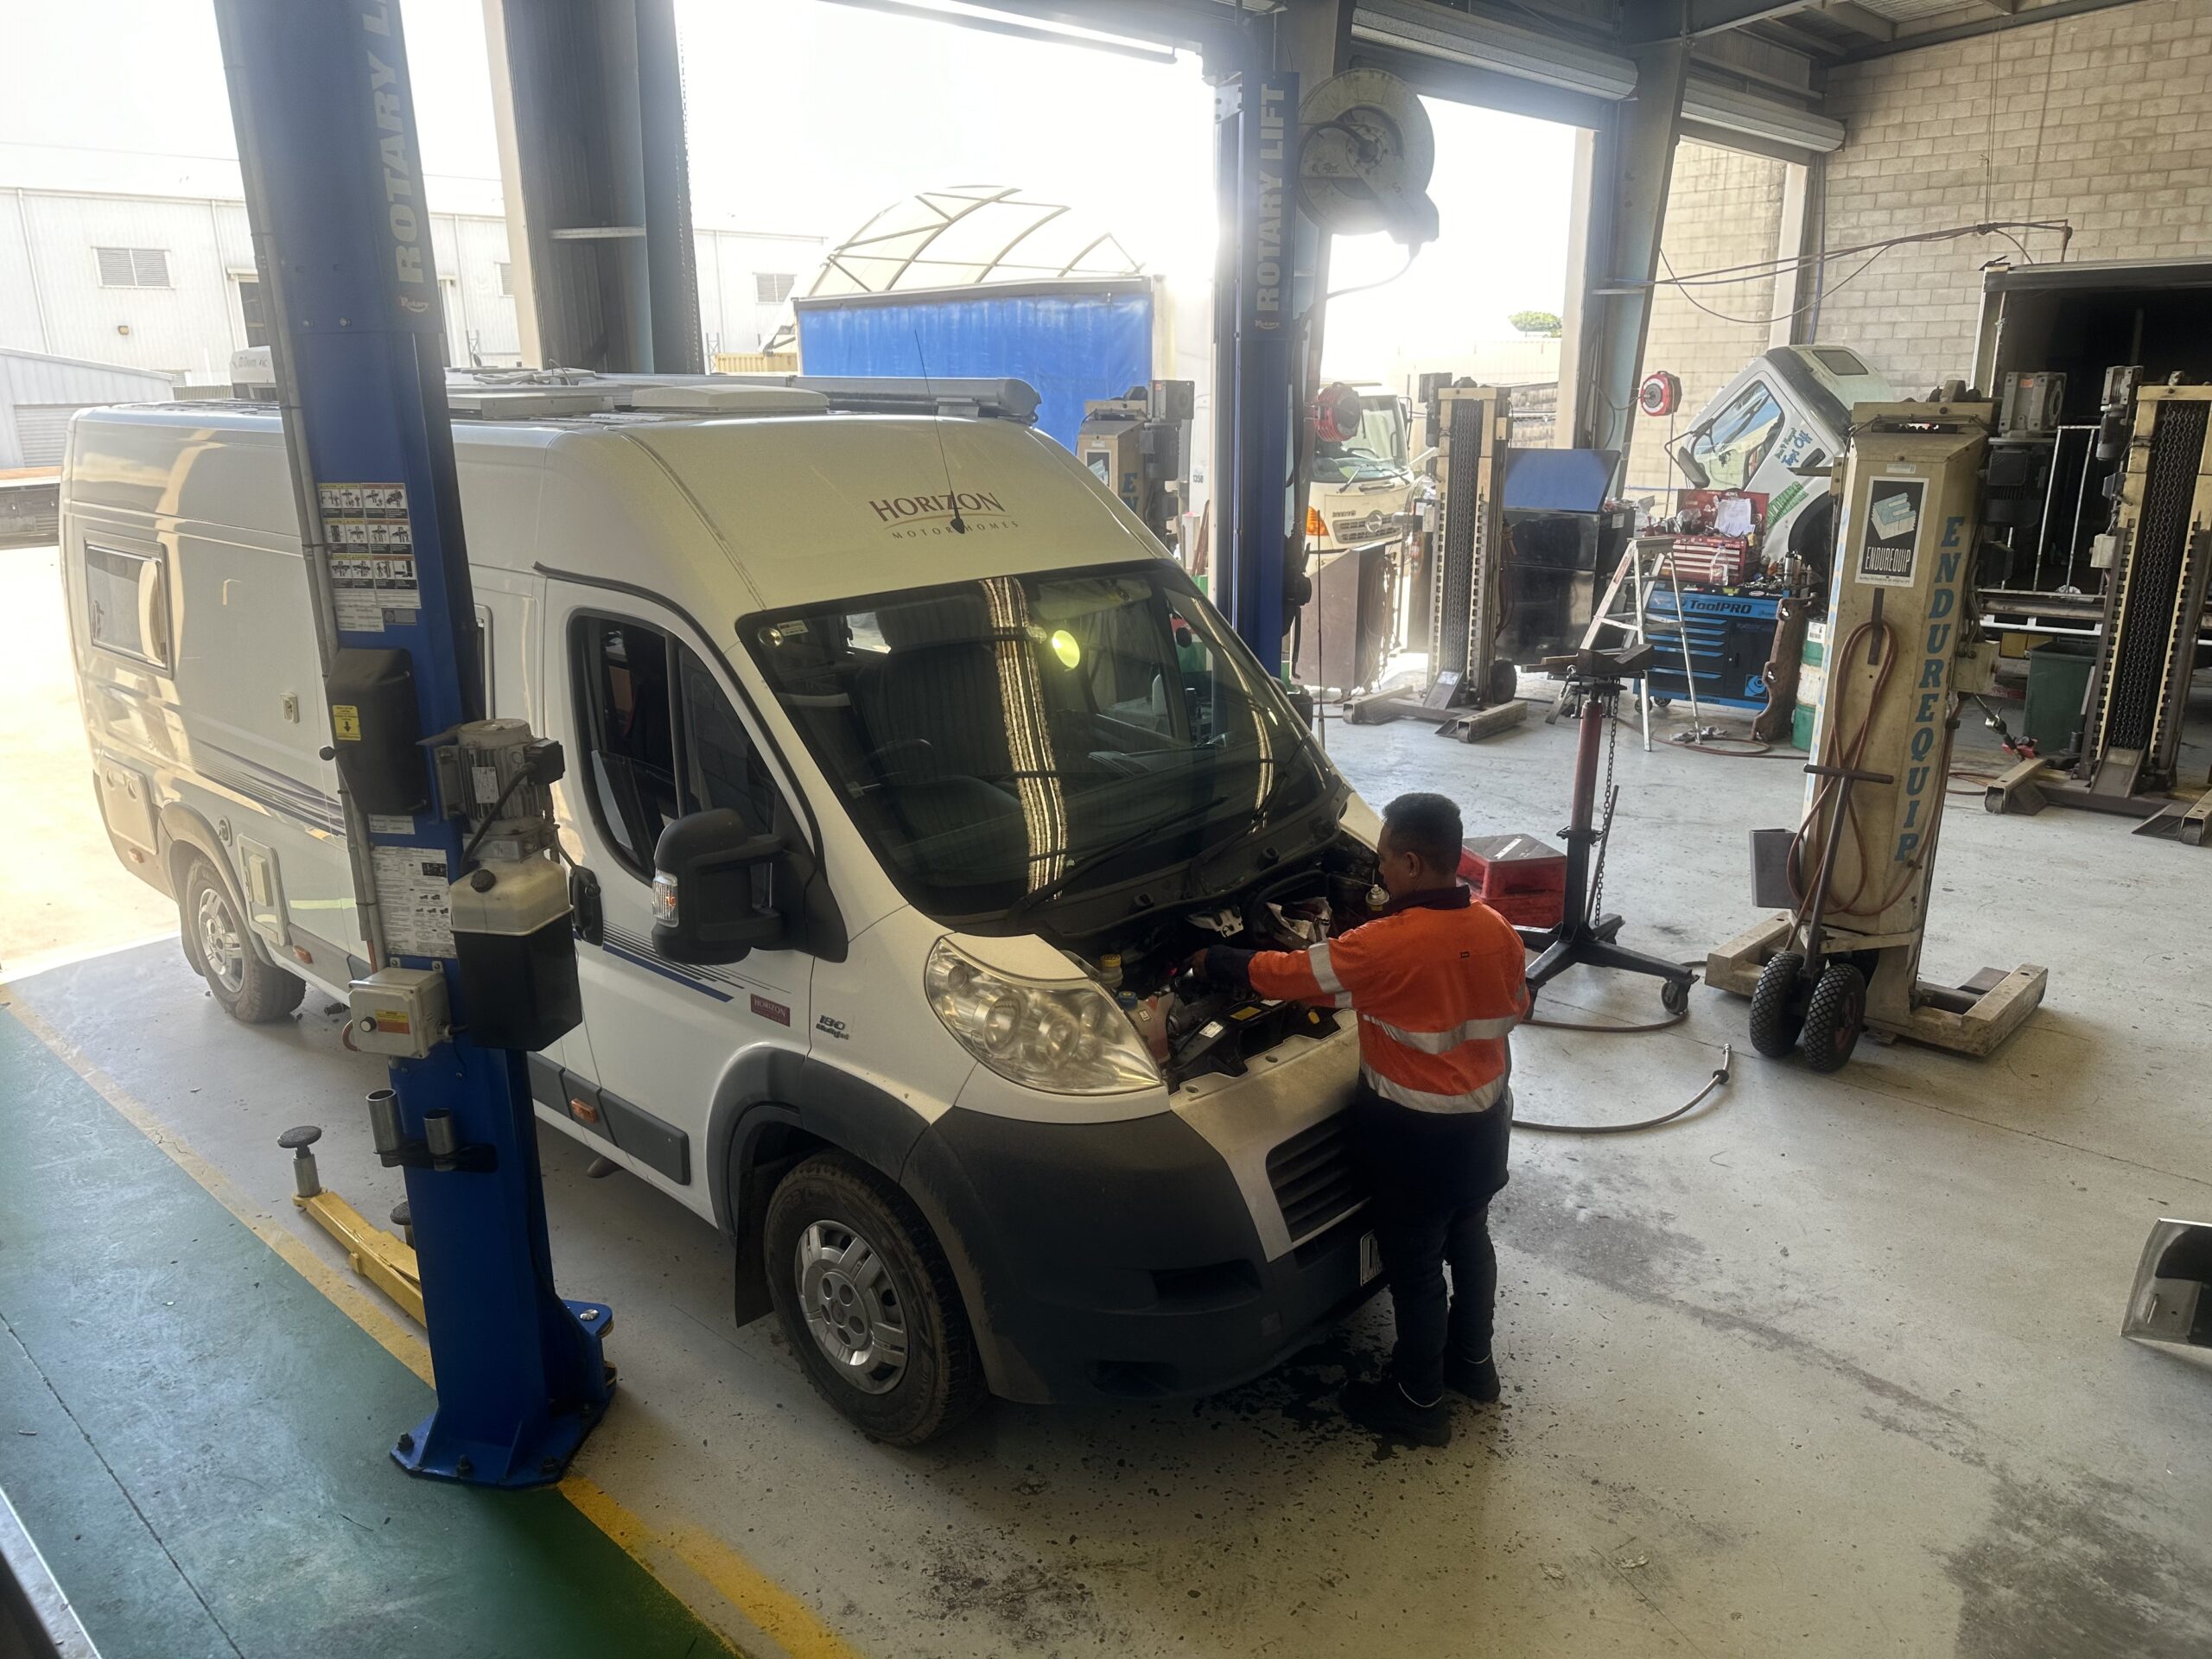 BDS Mechanical Repairs Mackay doing a service on a motorhome for an Injector Replacement